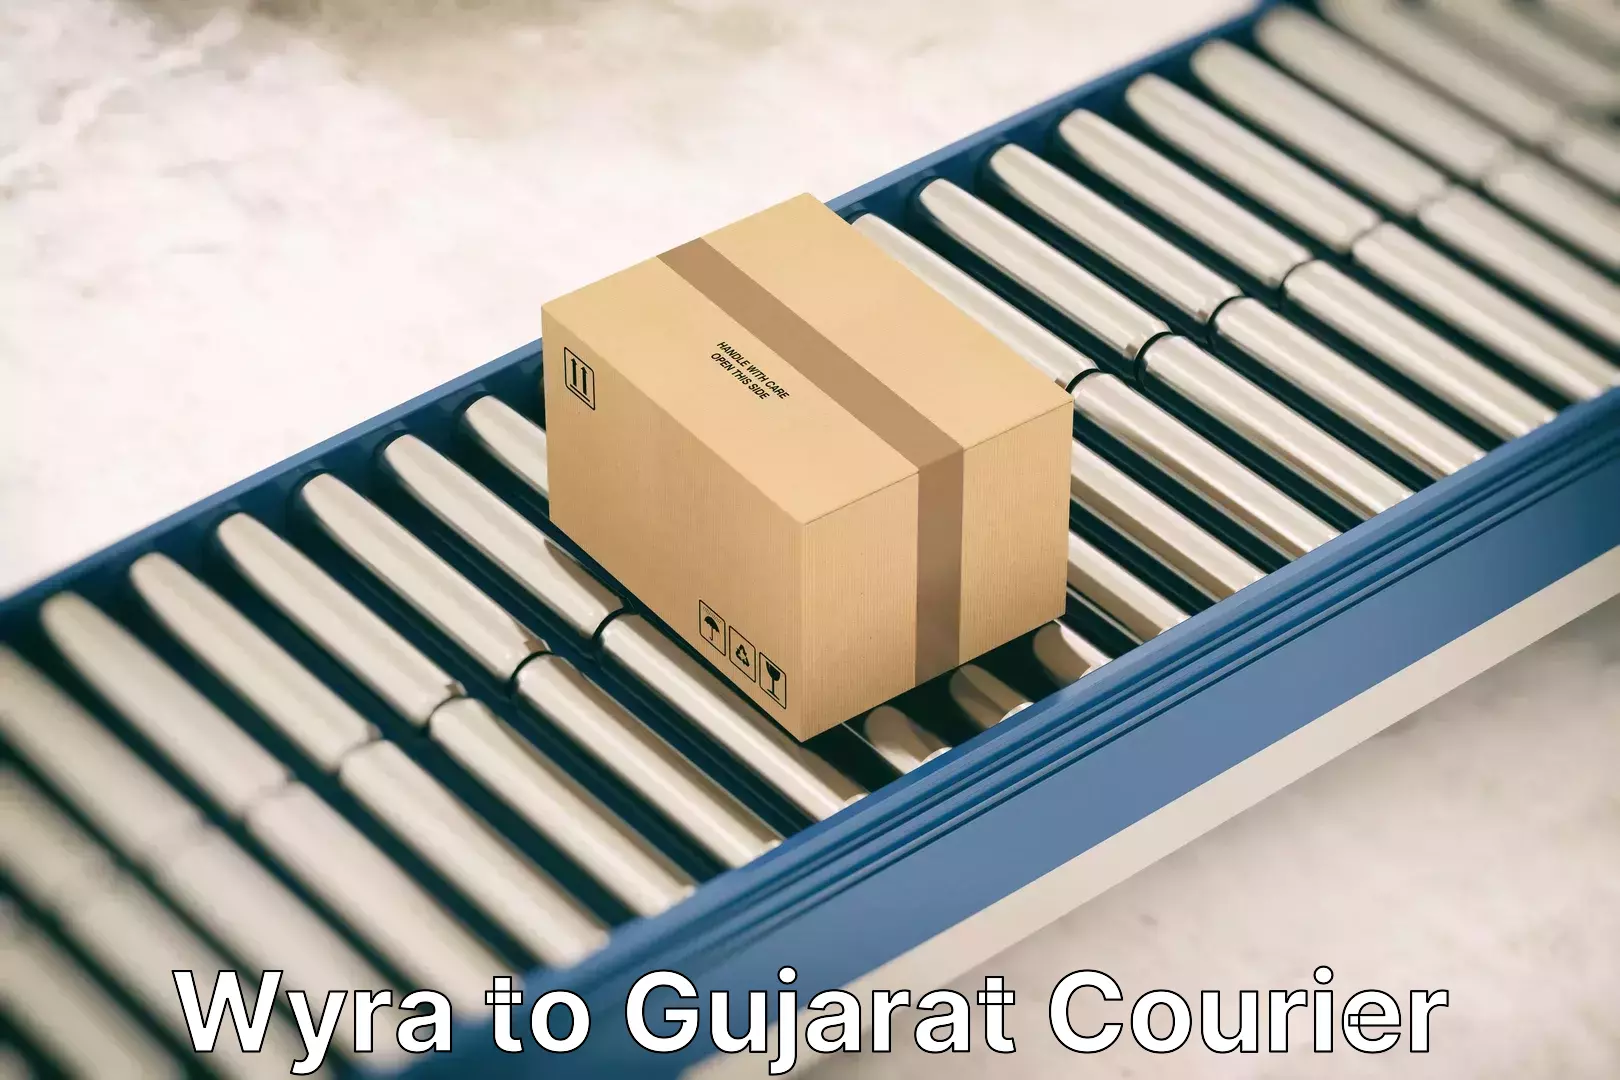 Professional relocation services Wyra to Gujarat